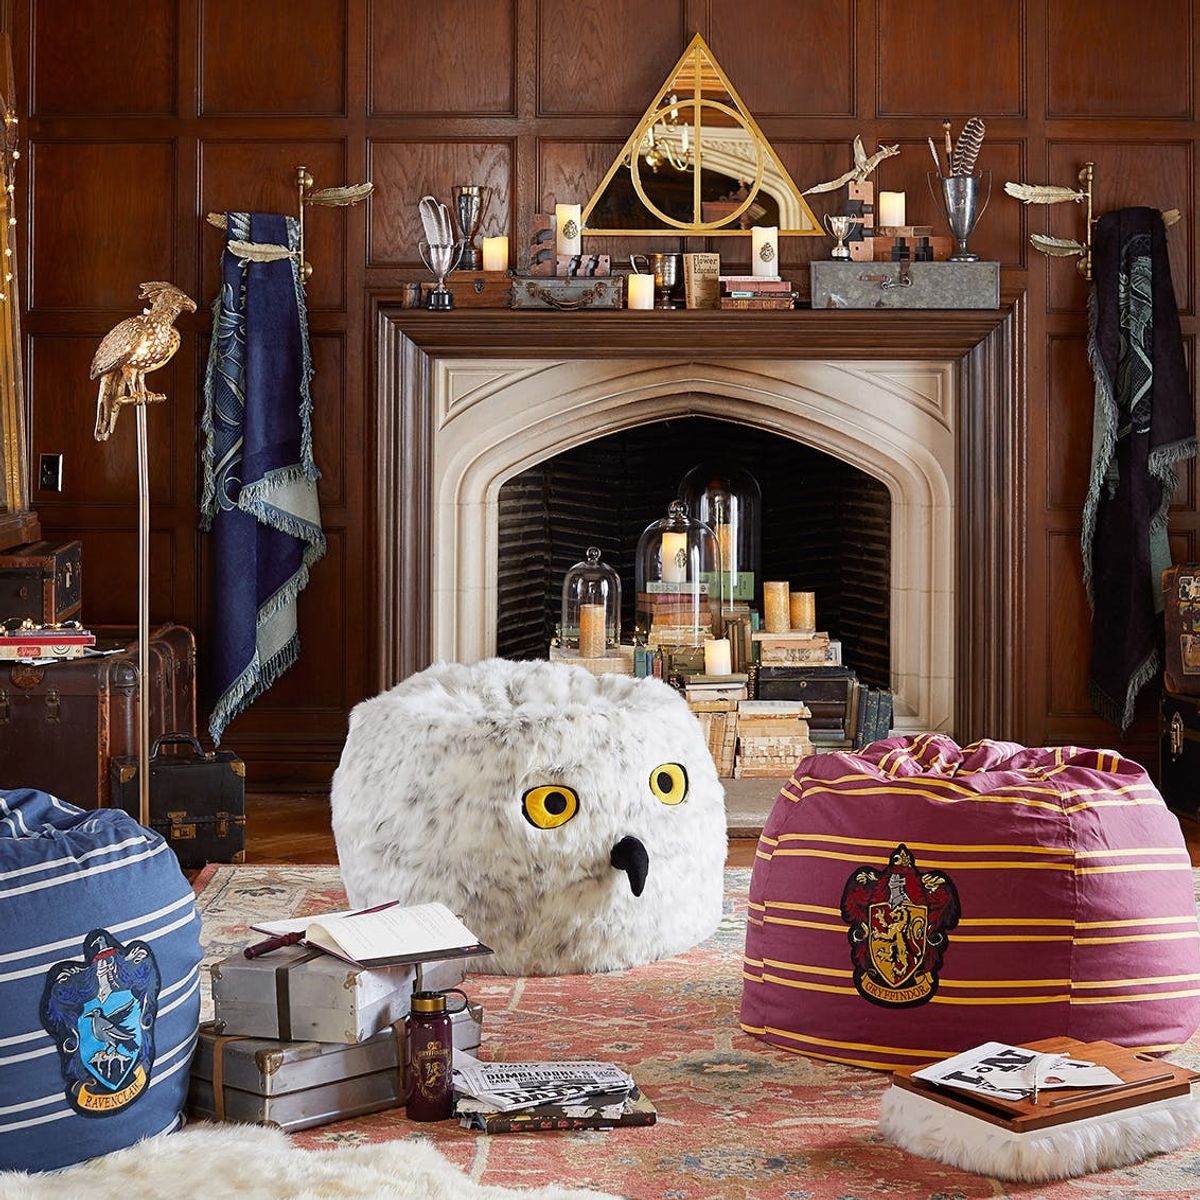 Pottery Barn Just Launched THREE New Harry Potter Collections And We’re Obsessed